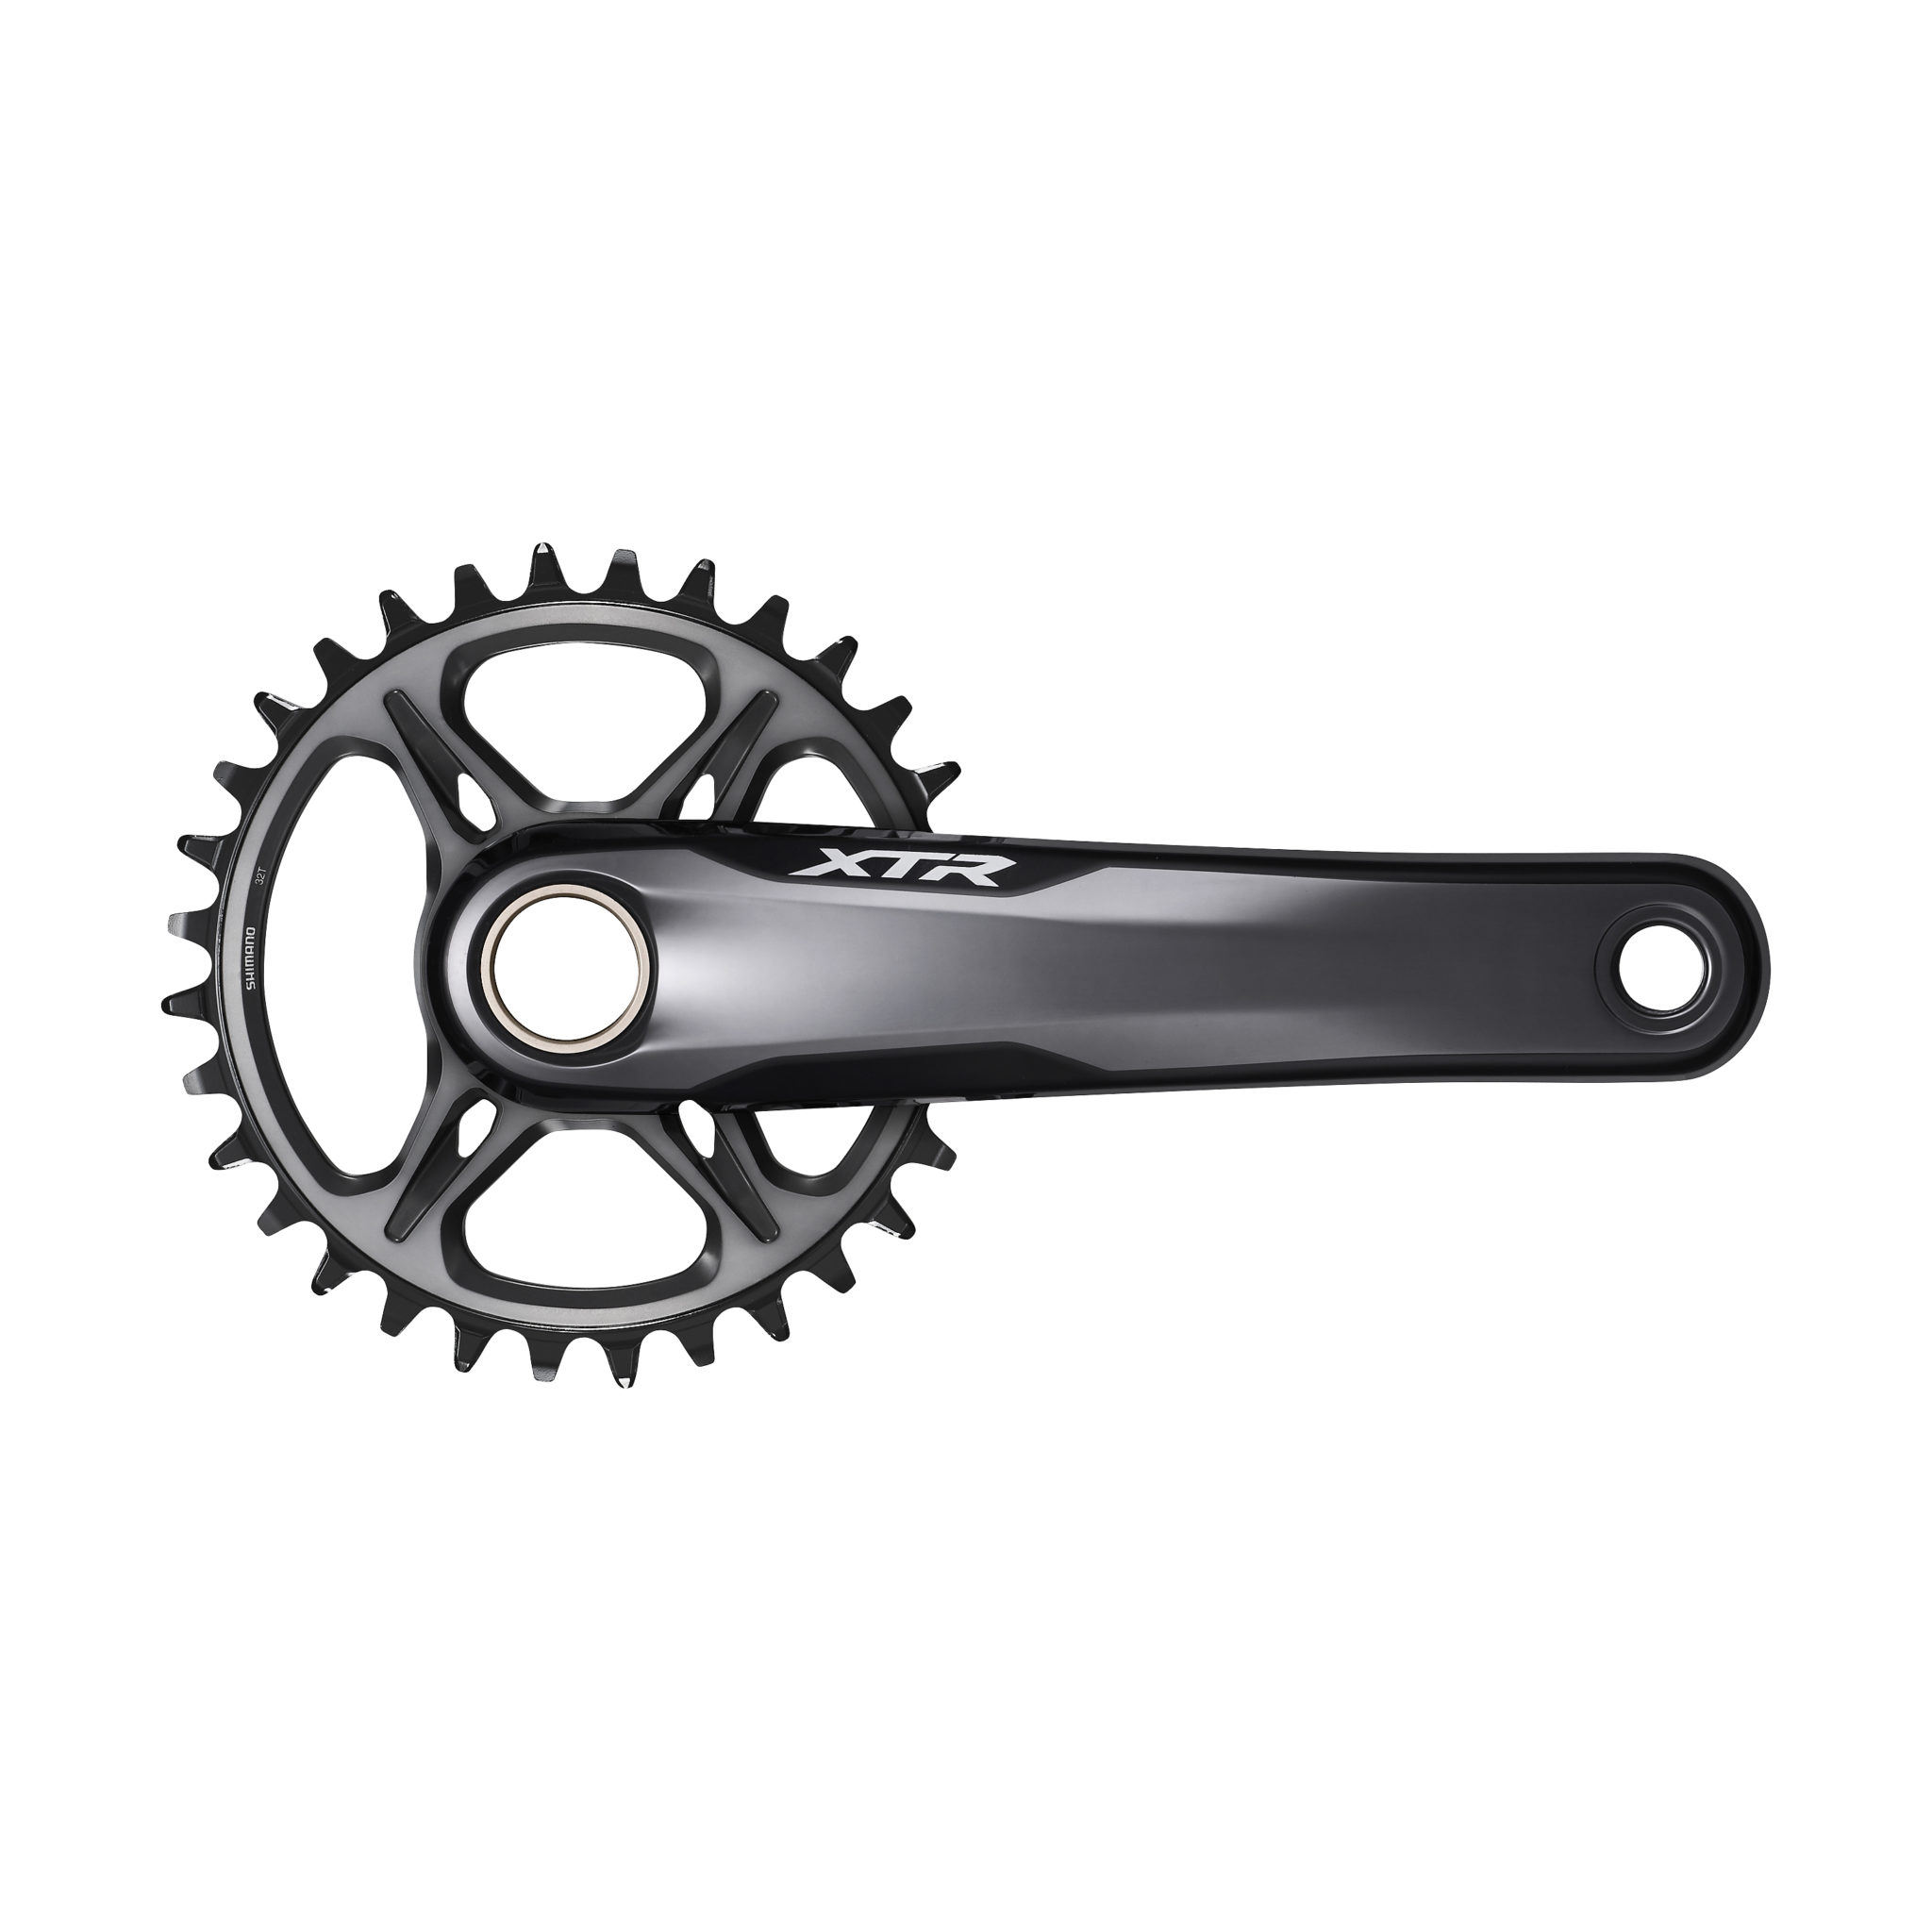 Essential new Shimano MTB components for high-end and entry-level ...